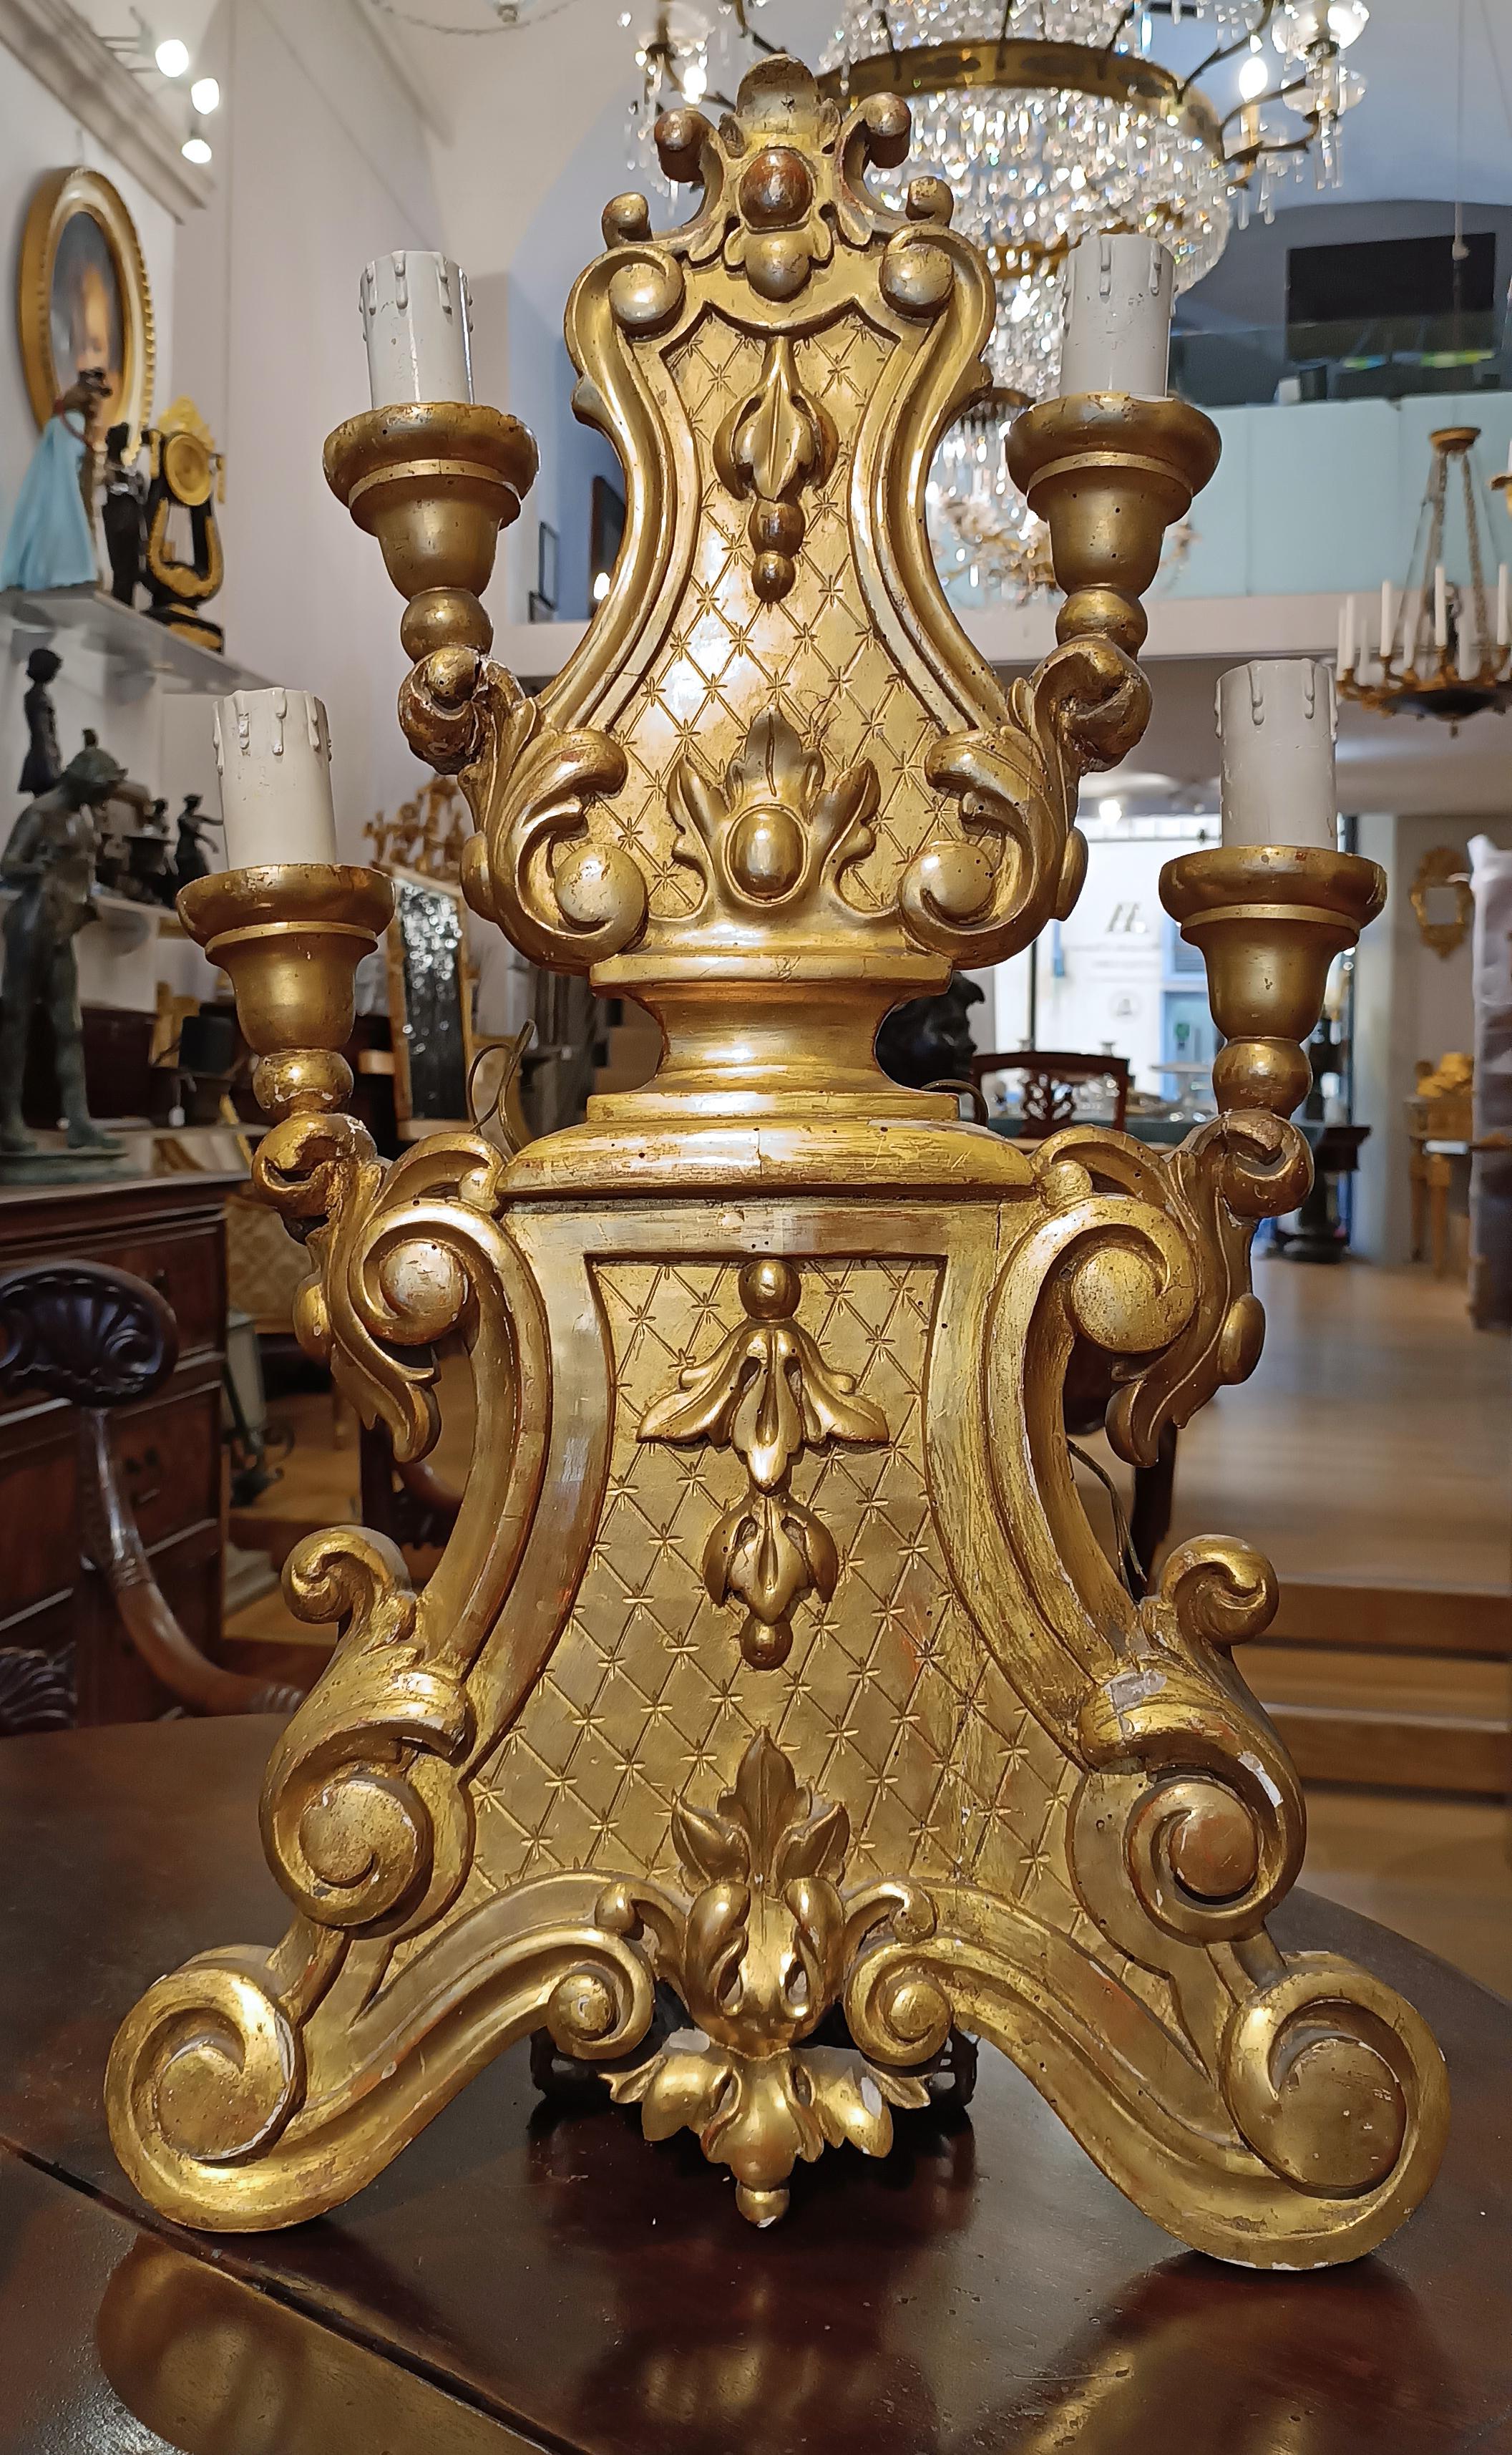 This pair of table candlesticks is a fine example of Tuscan manufacturing from the mid-18th century. Made of carved wood and finely gilded in pure gold, these candlesticks exhibit high craftsmanship and refined aesthetic taste. Their 